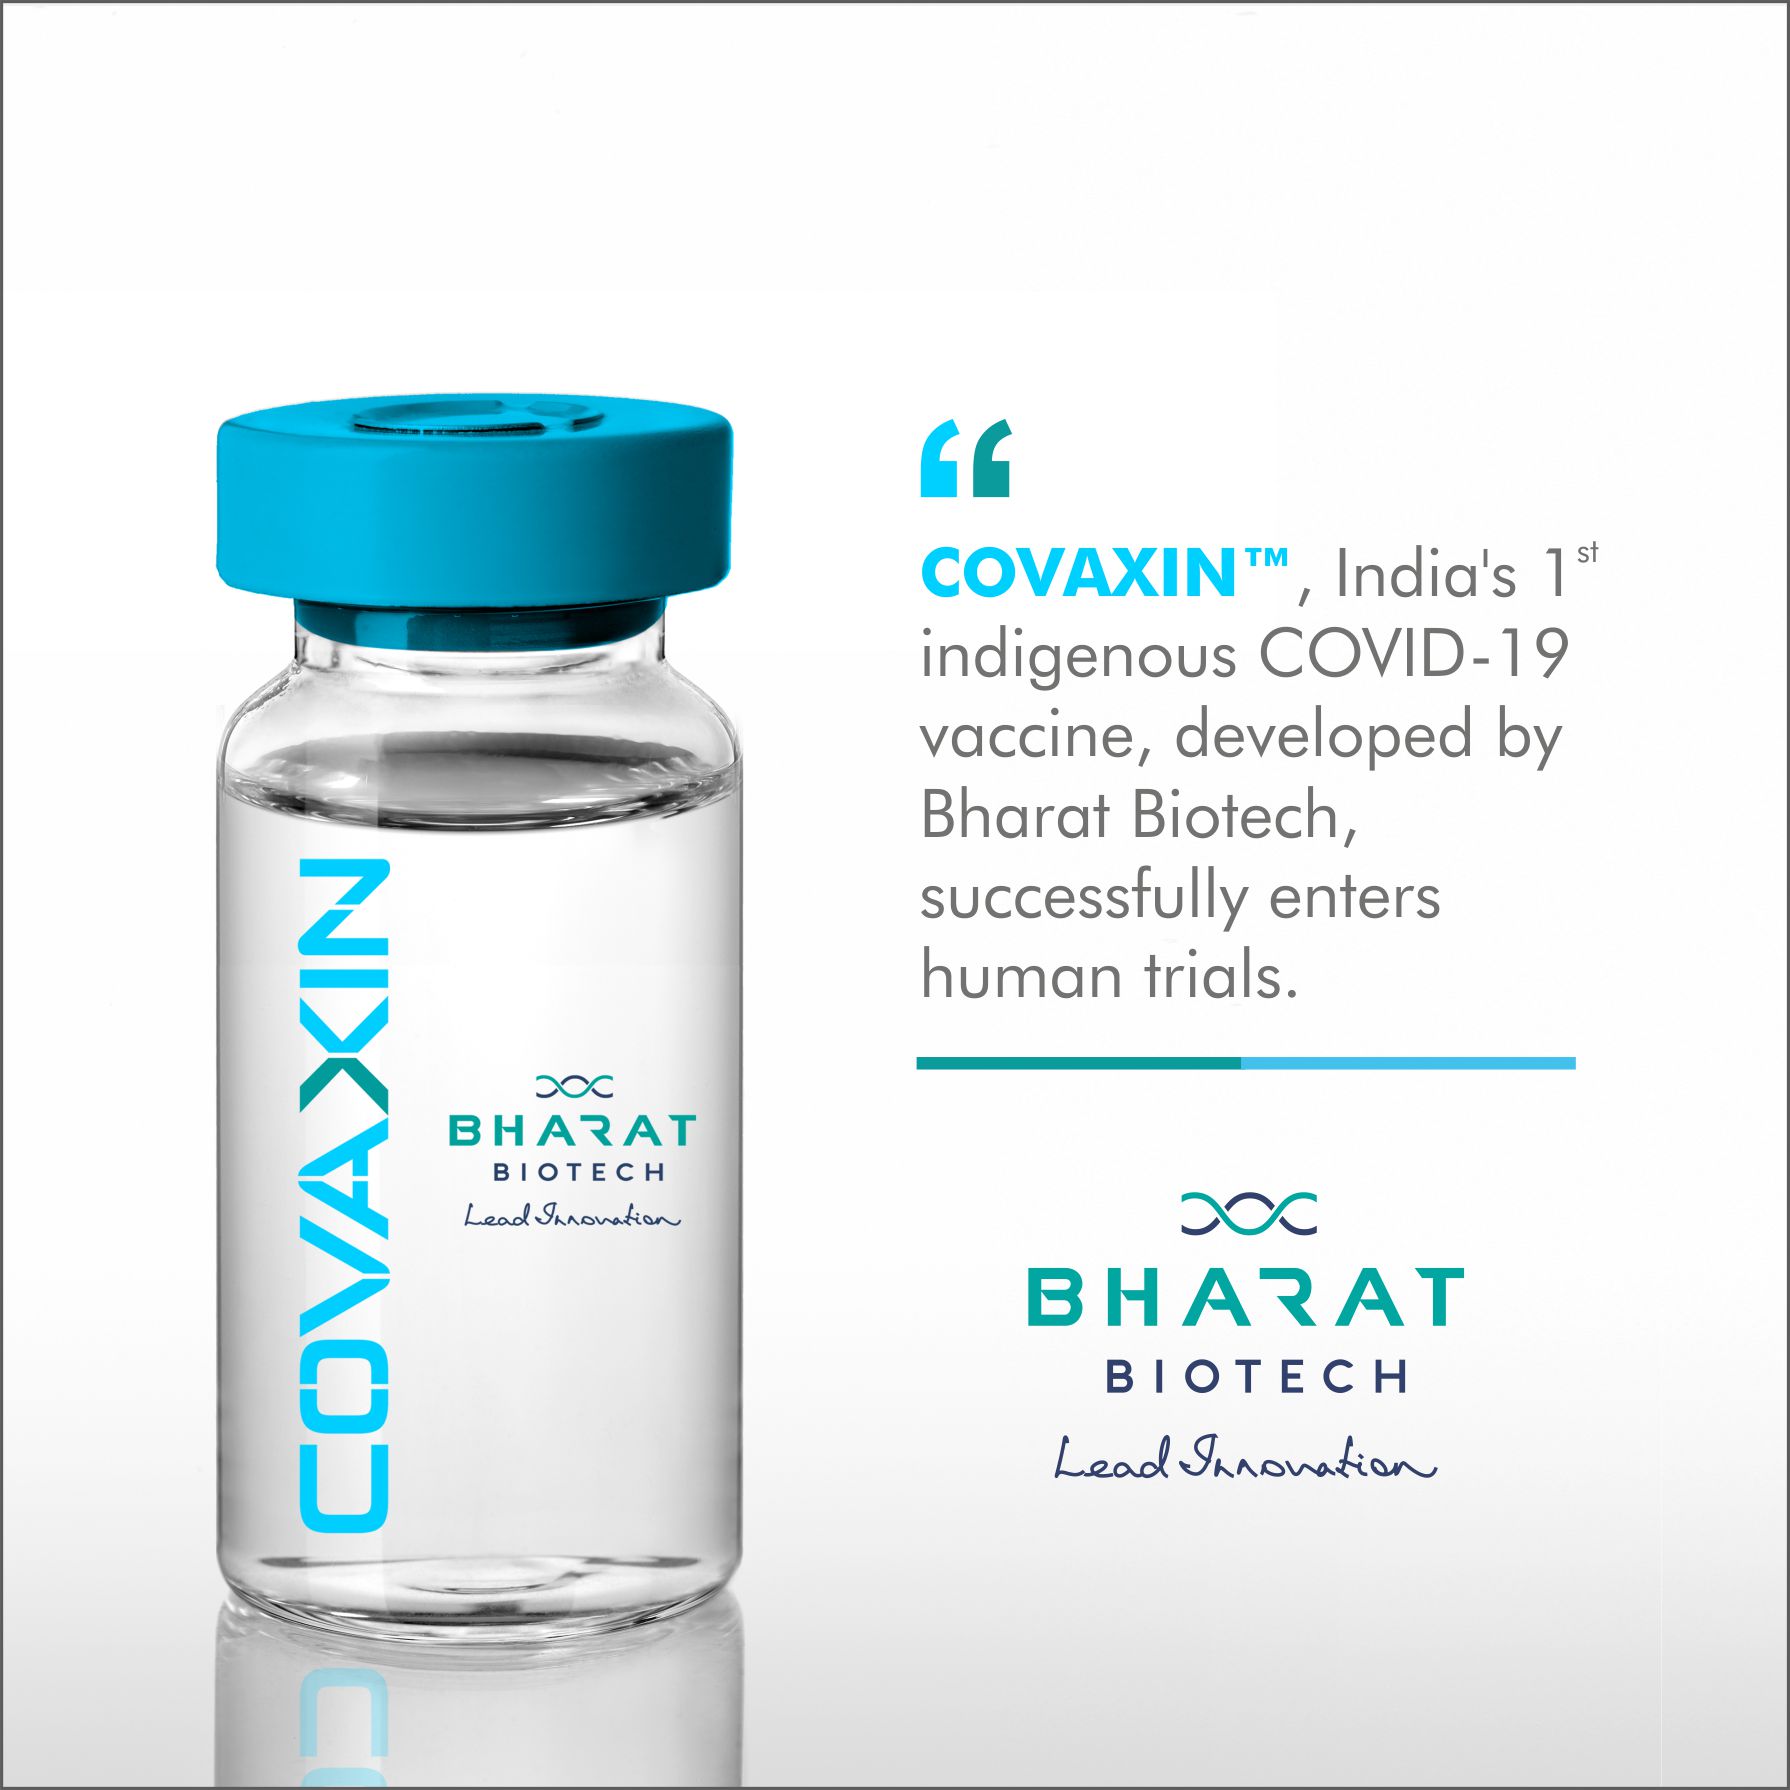 Bharat Biotech to Initiate Clinical Trials Evaluating Covaxin (India's First COVID-19 Vaccine) in July 2020